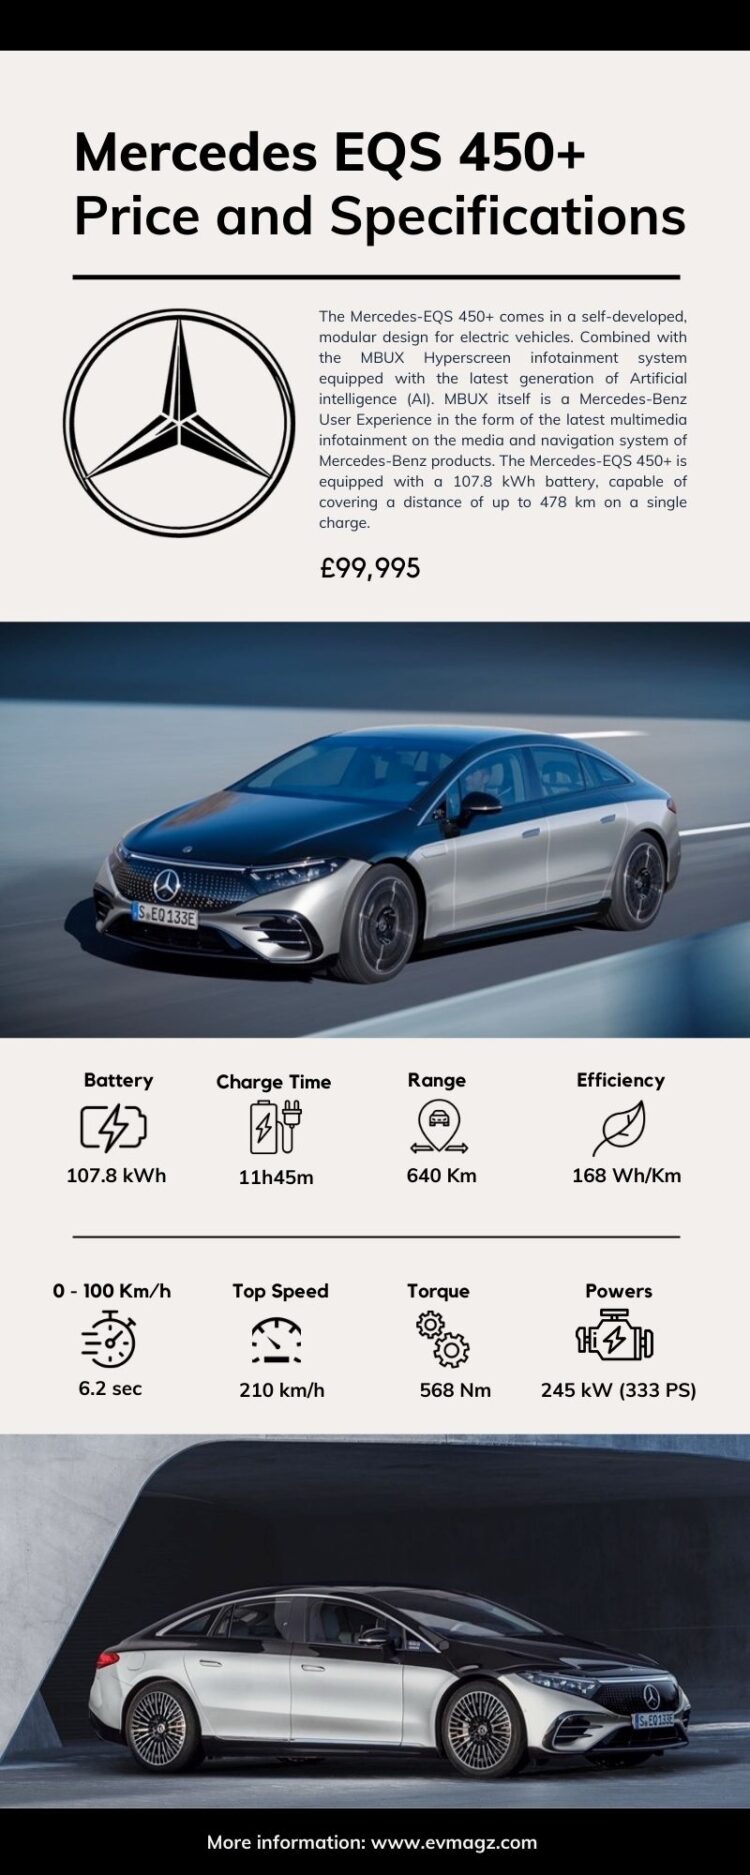 Mercedes EQS 450+ Price and Specifications [Infographic]